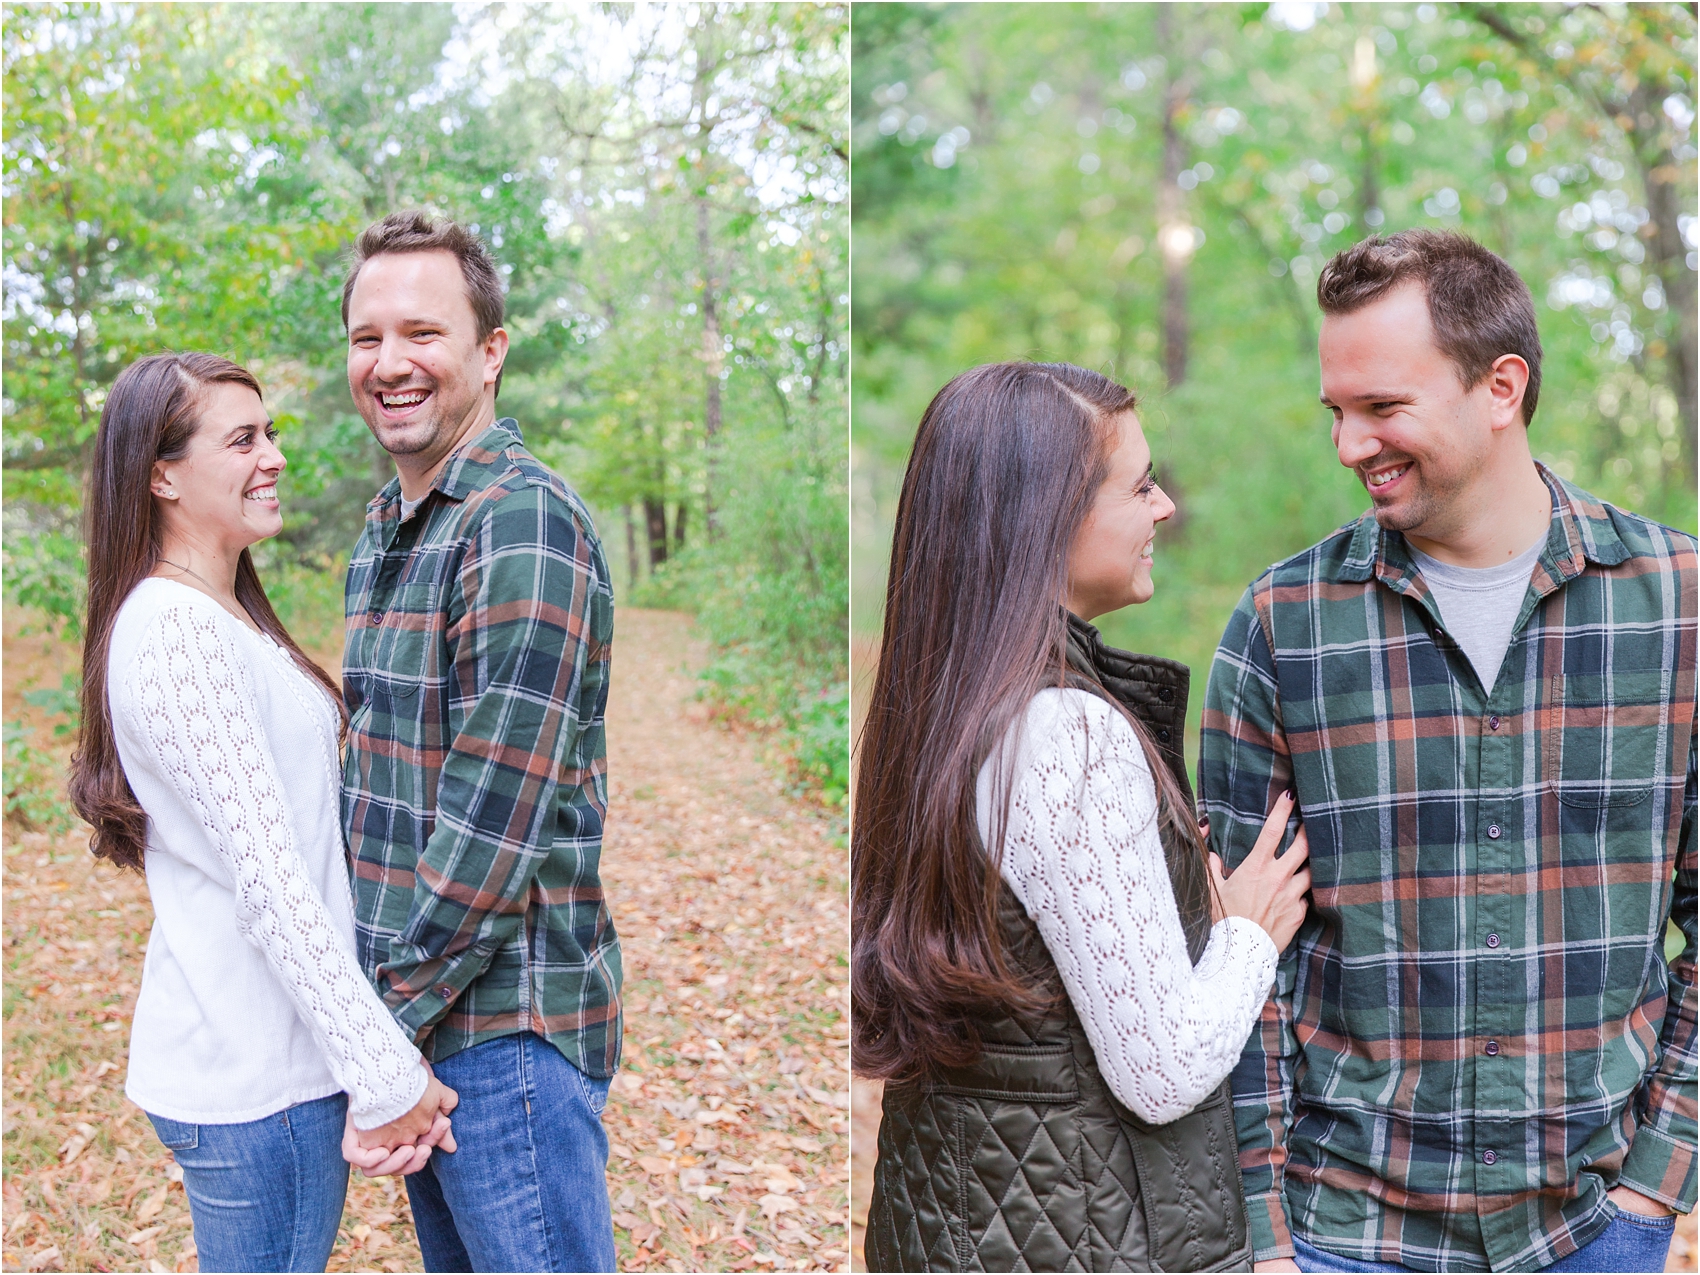 relaxed-autumn-engagement-photos-at-hudson-mills-metropark-in-dexter-mi-by-courtney-carolyn-photography_0006.jpg